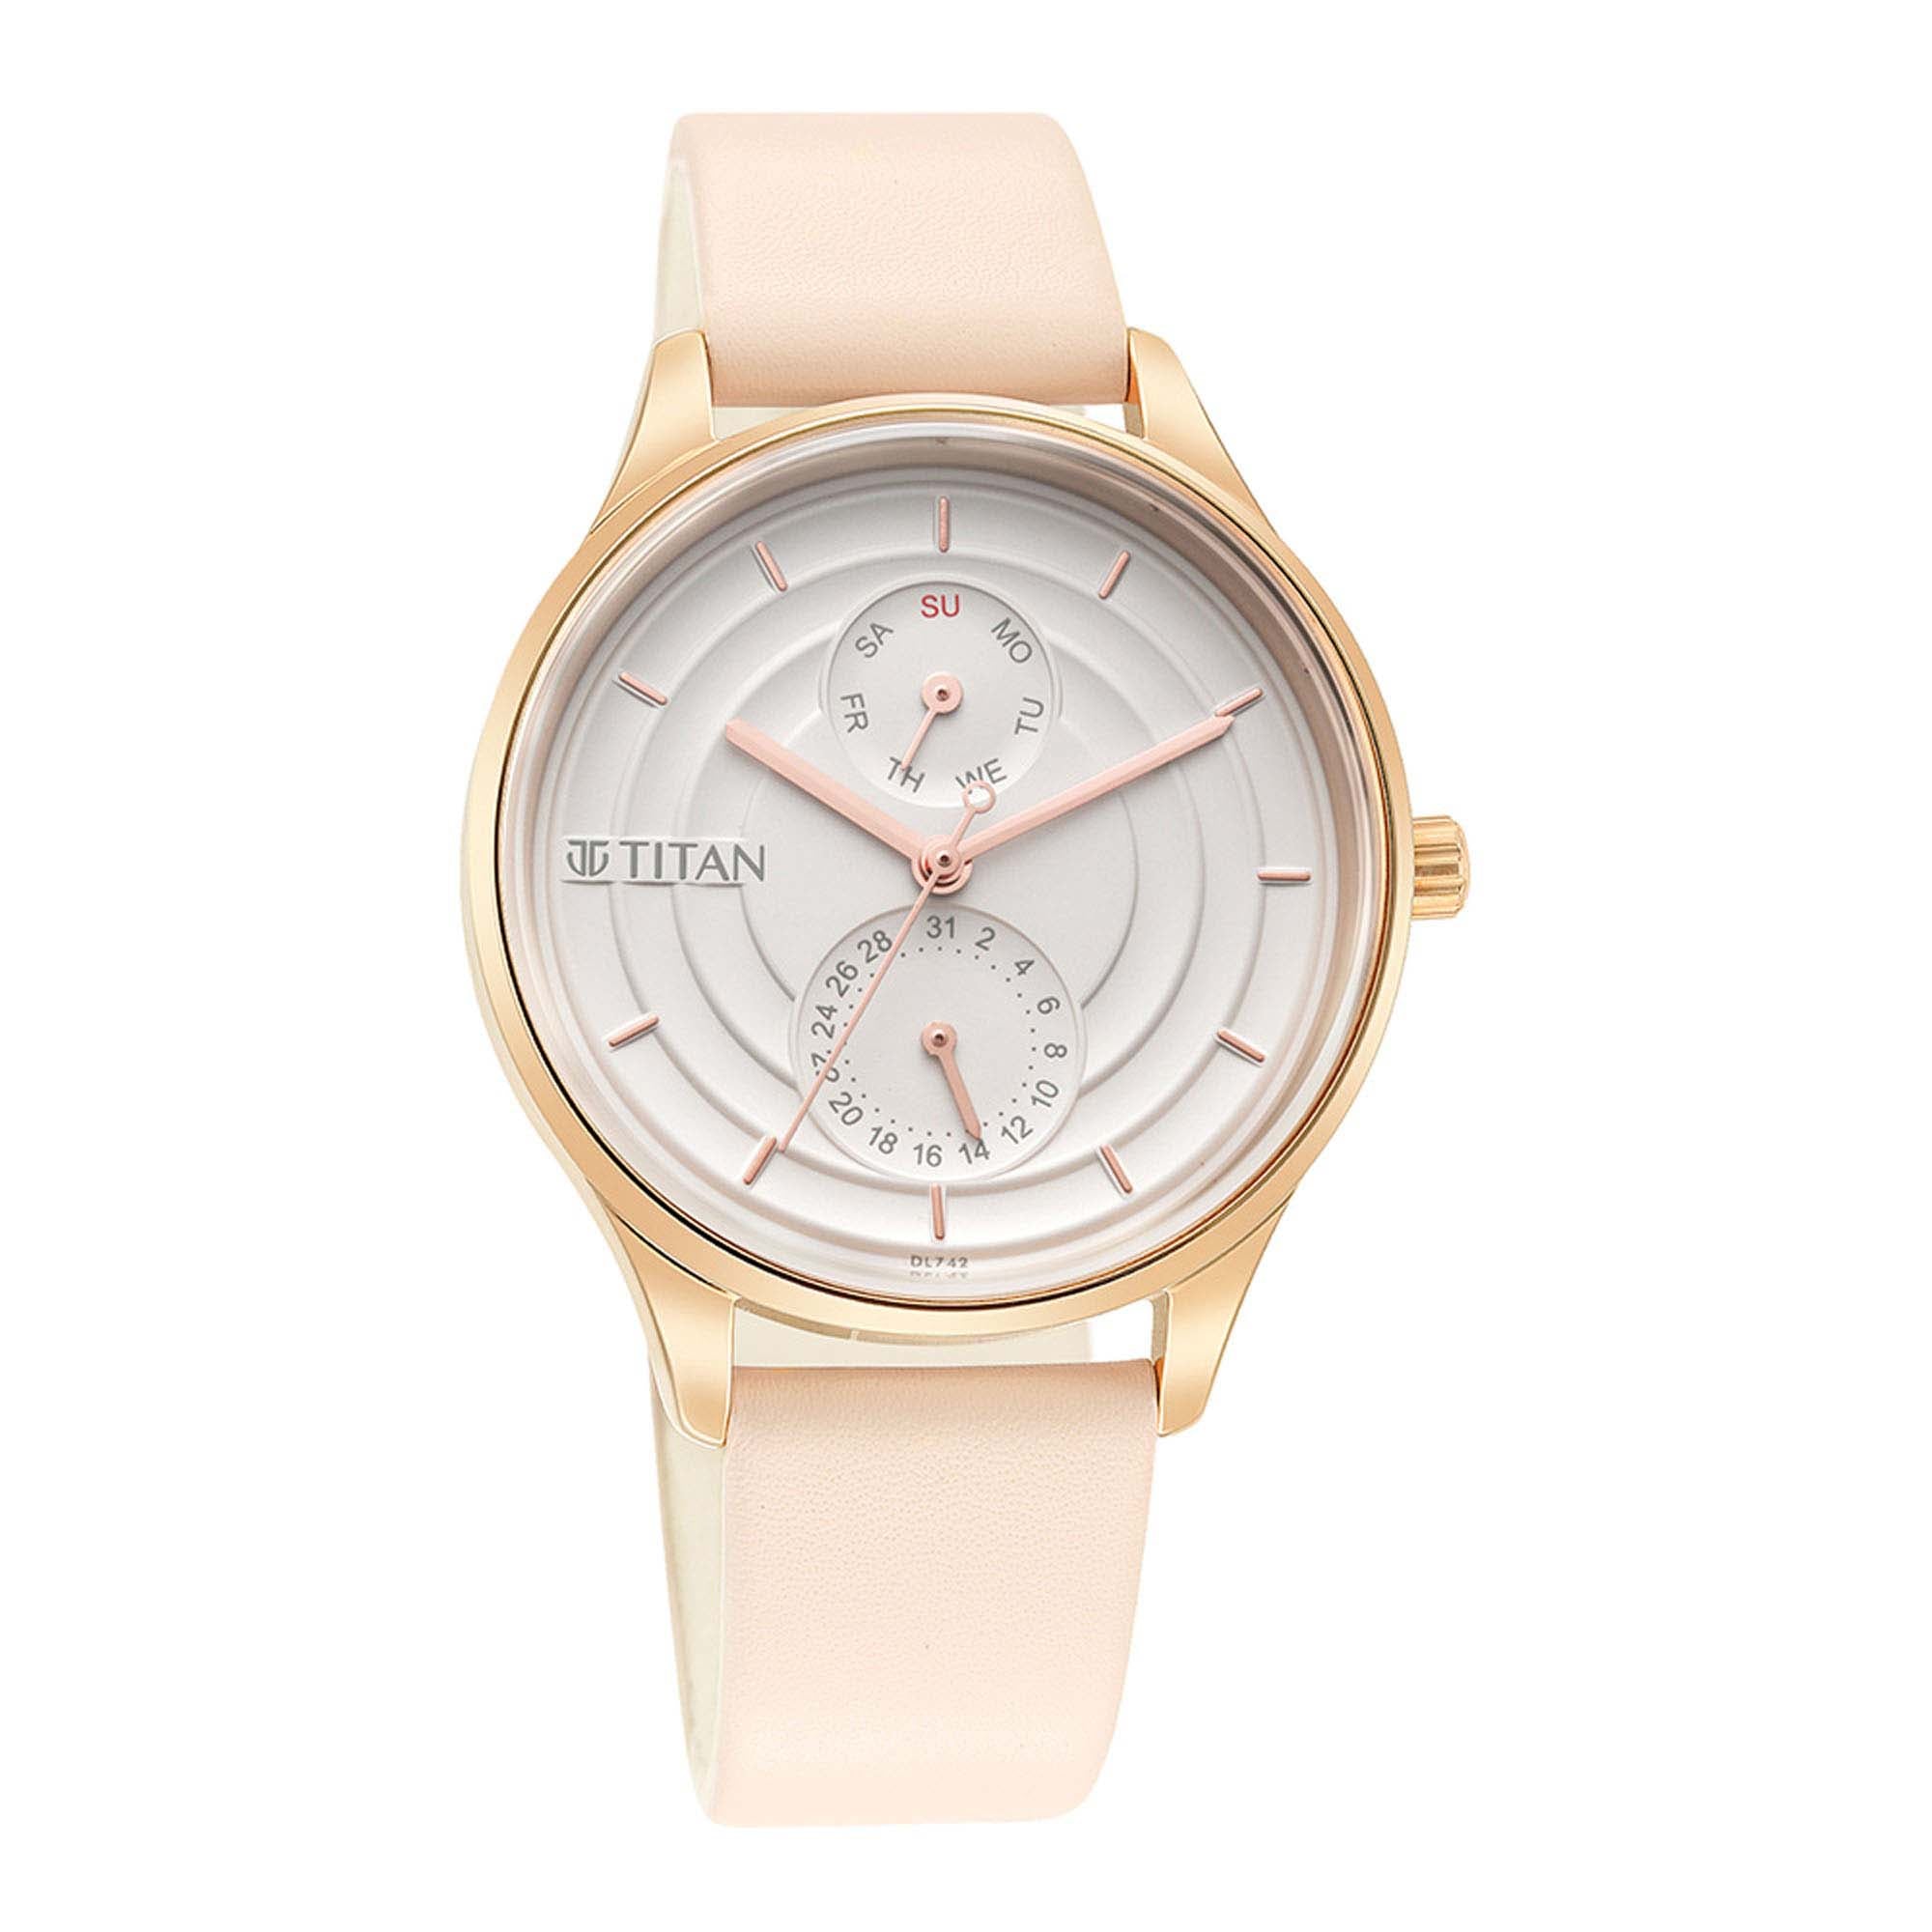 Titan Neo Workdays Silver Dial Women Watch With Leather Strap